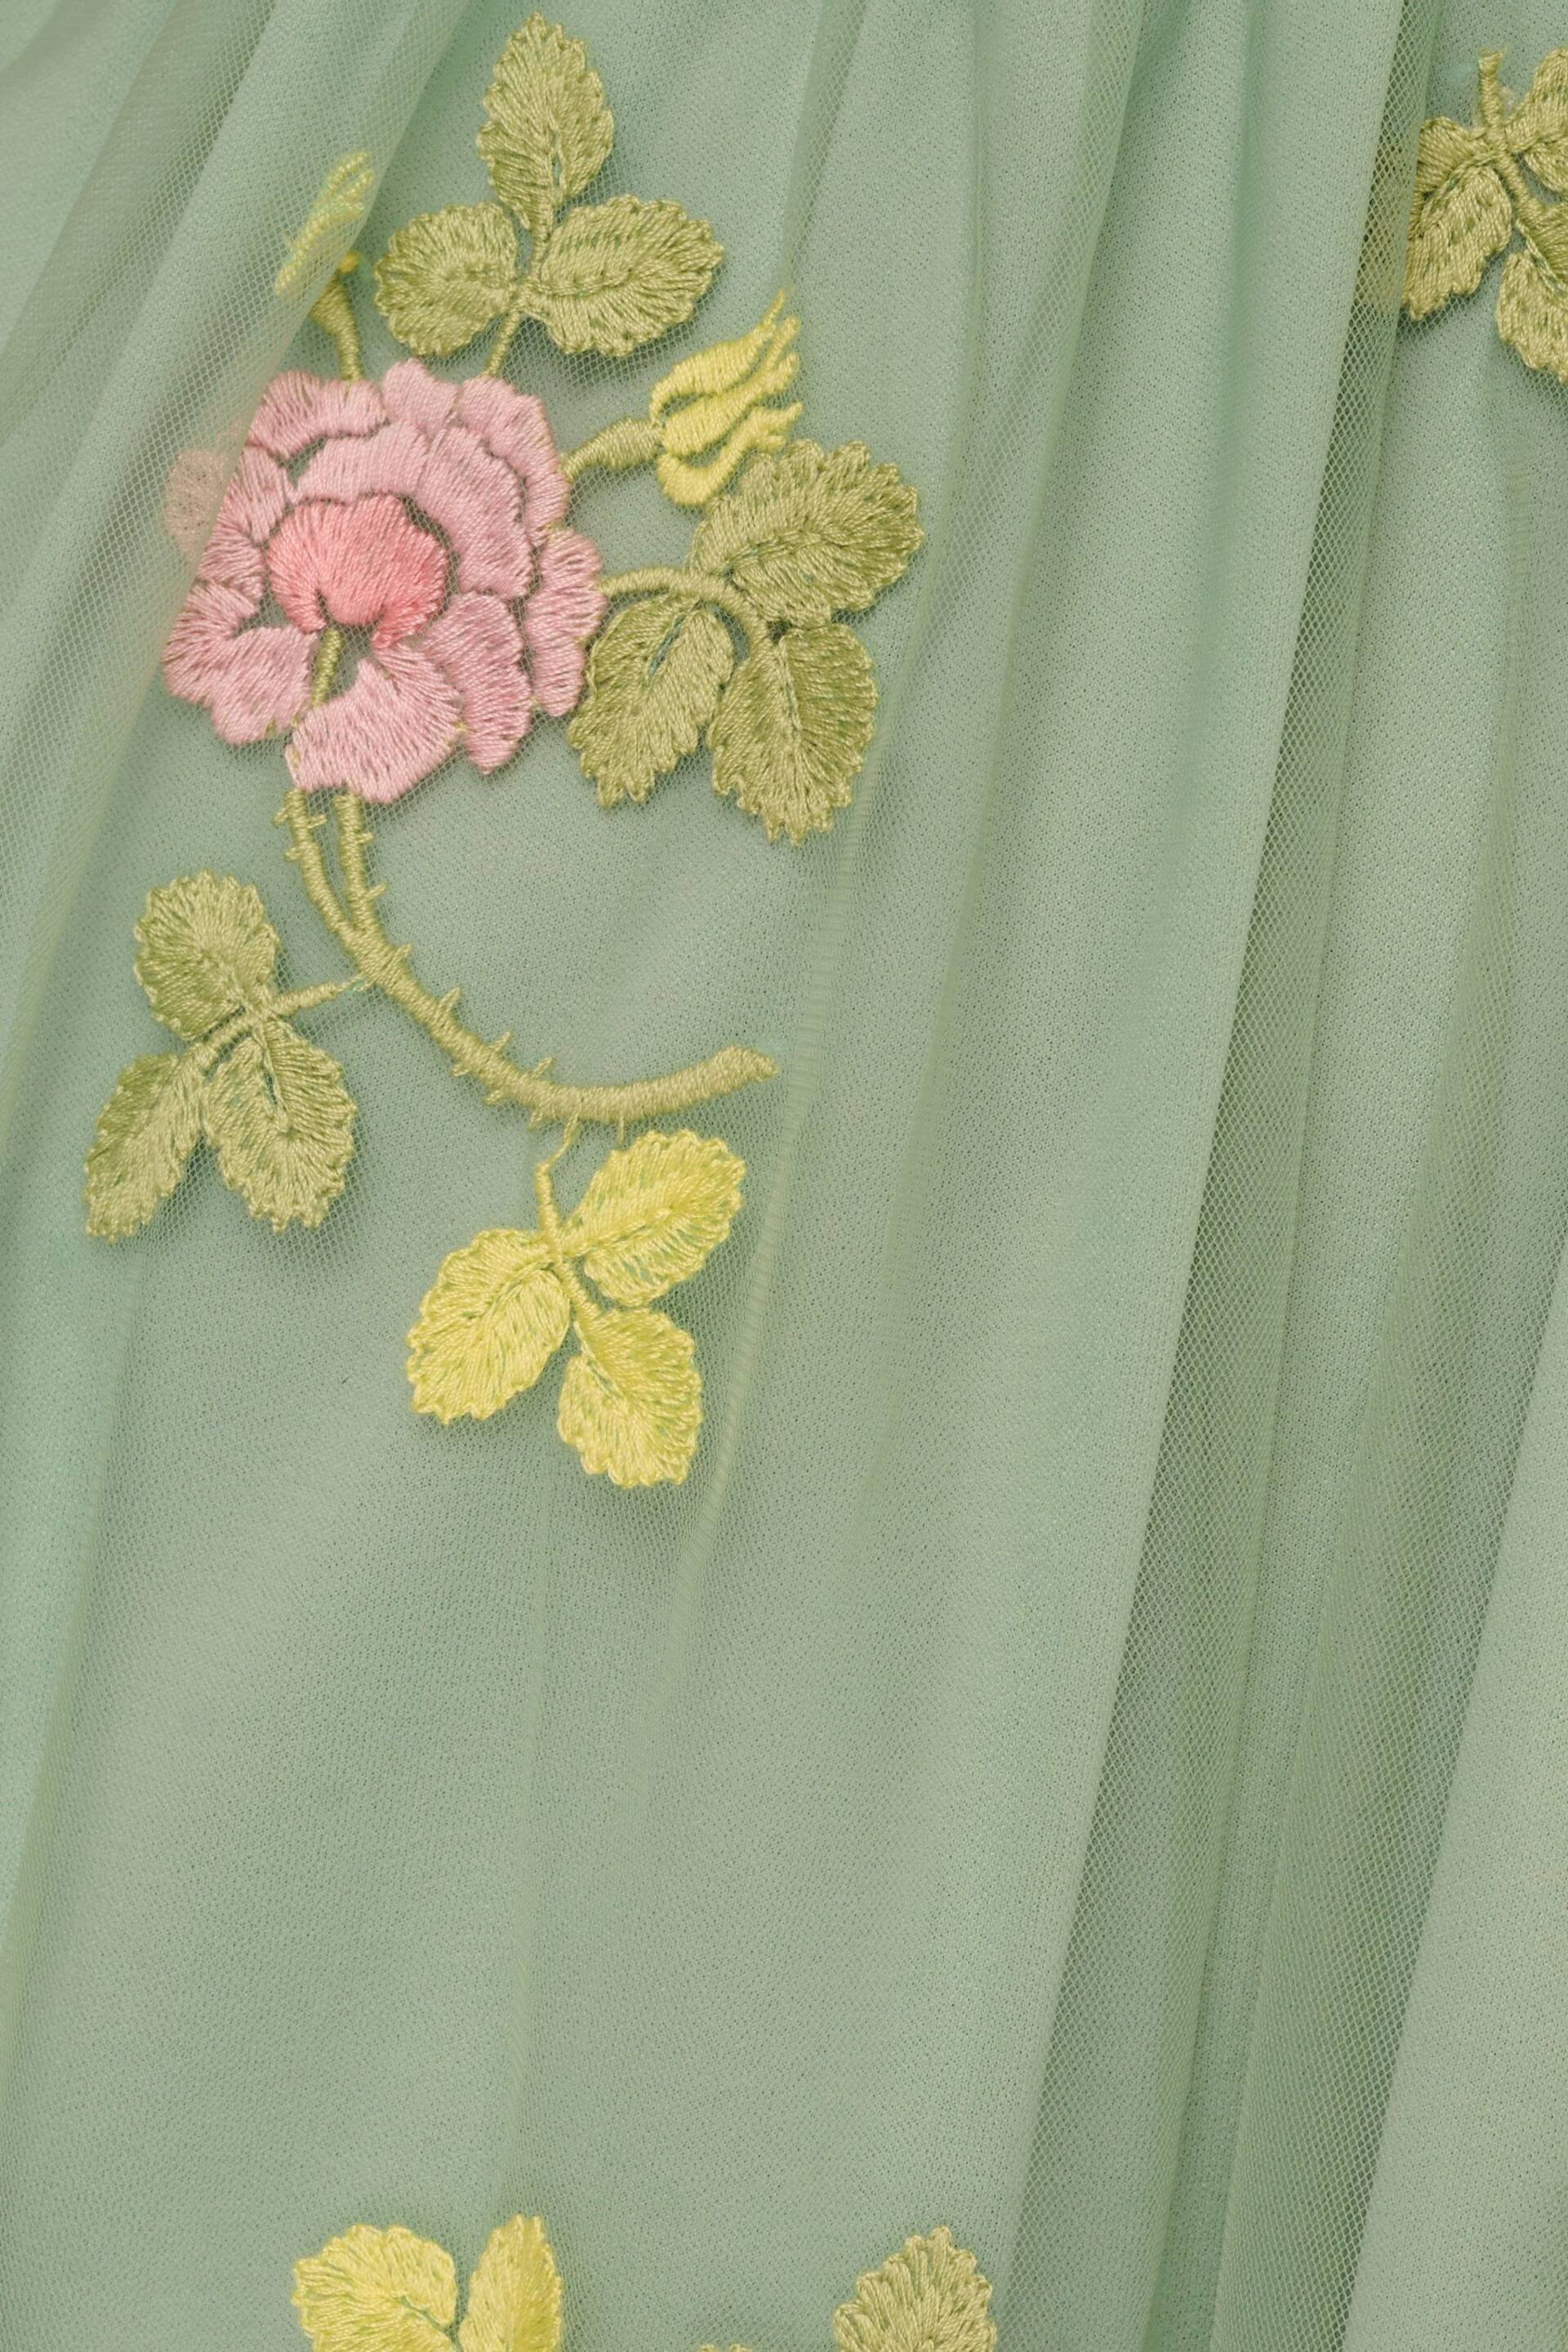 Adrianna Papell Green Embroidered Maxi Dress - Image 7 of 7